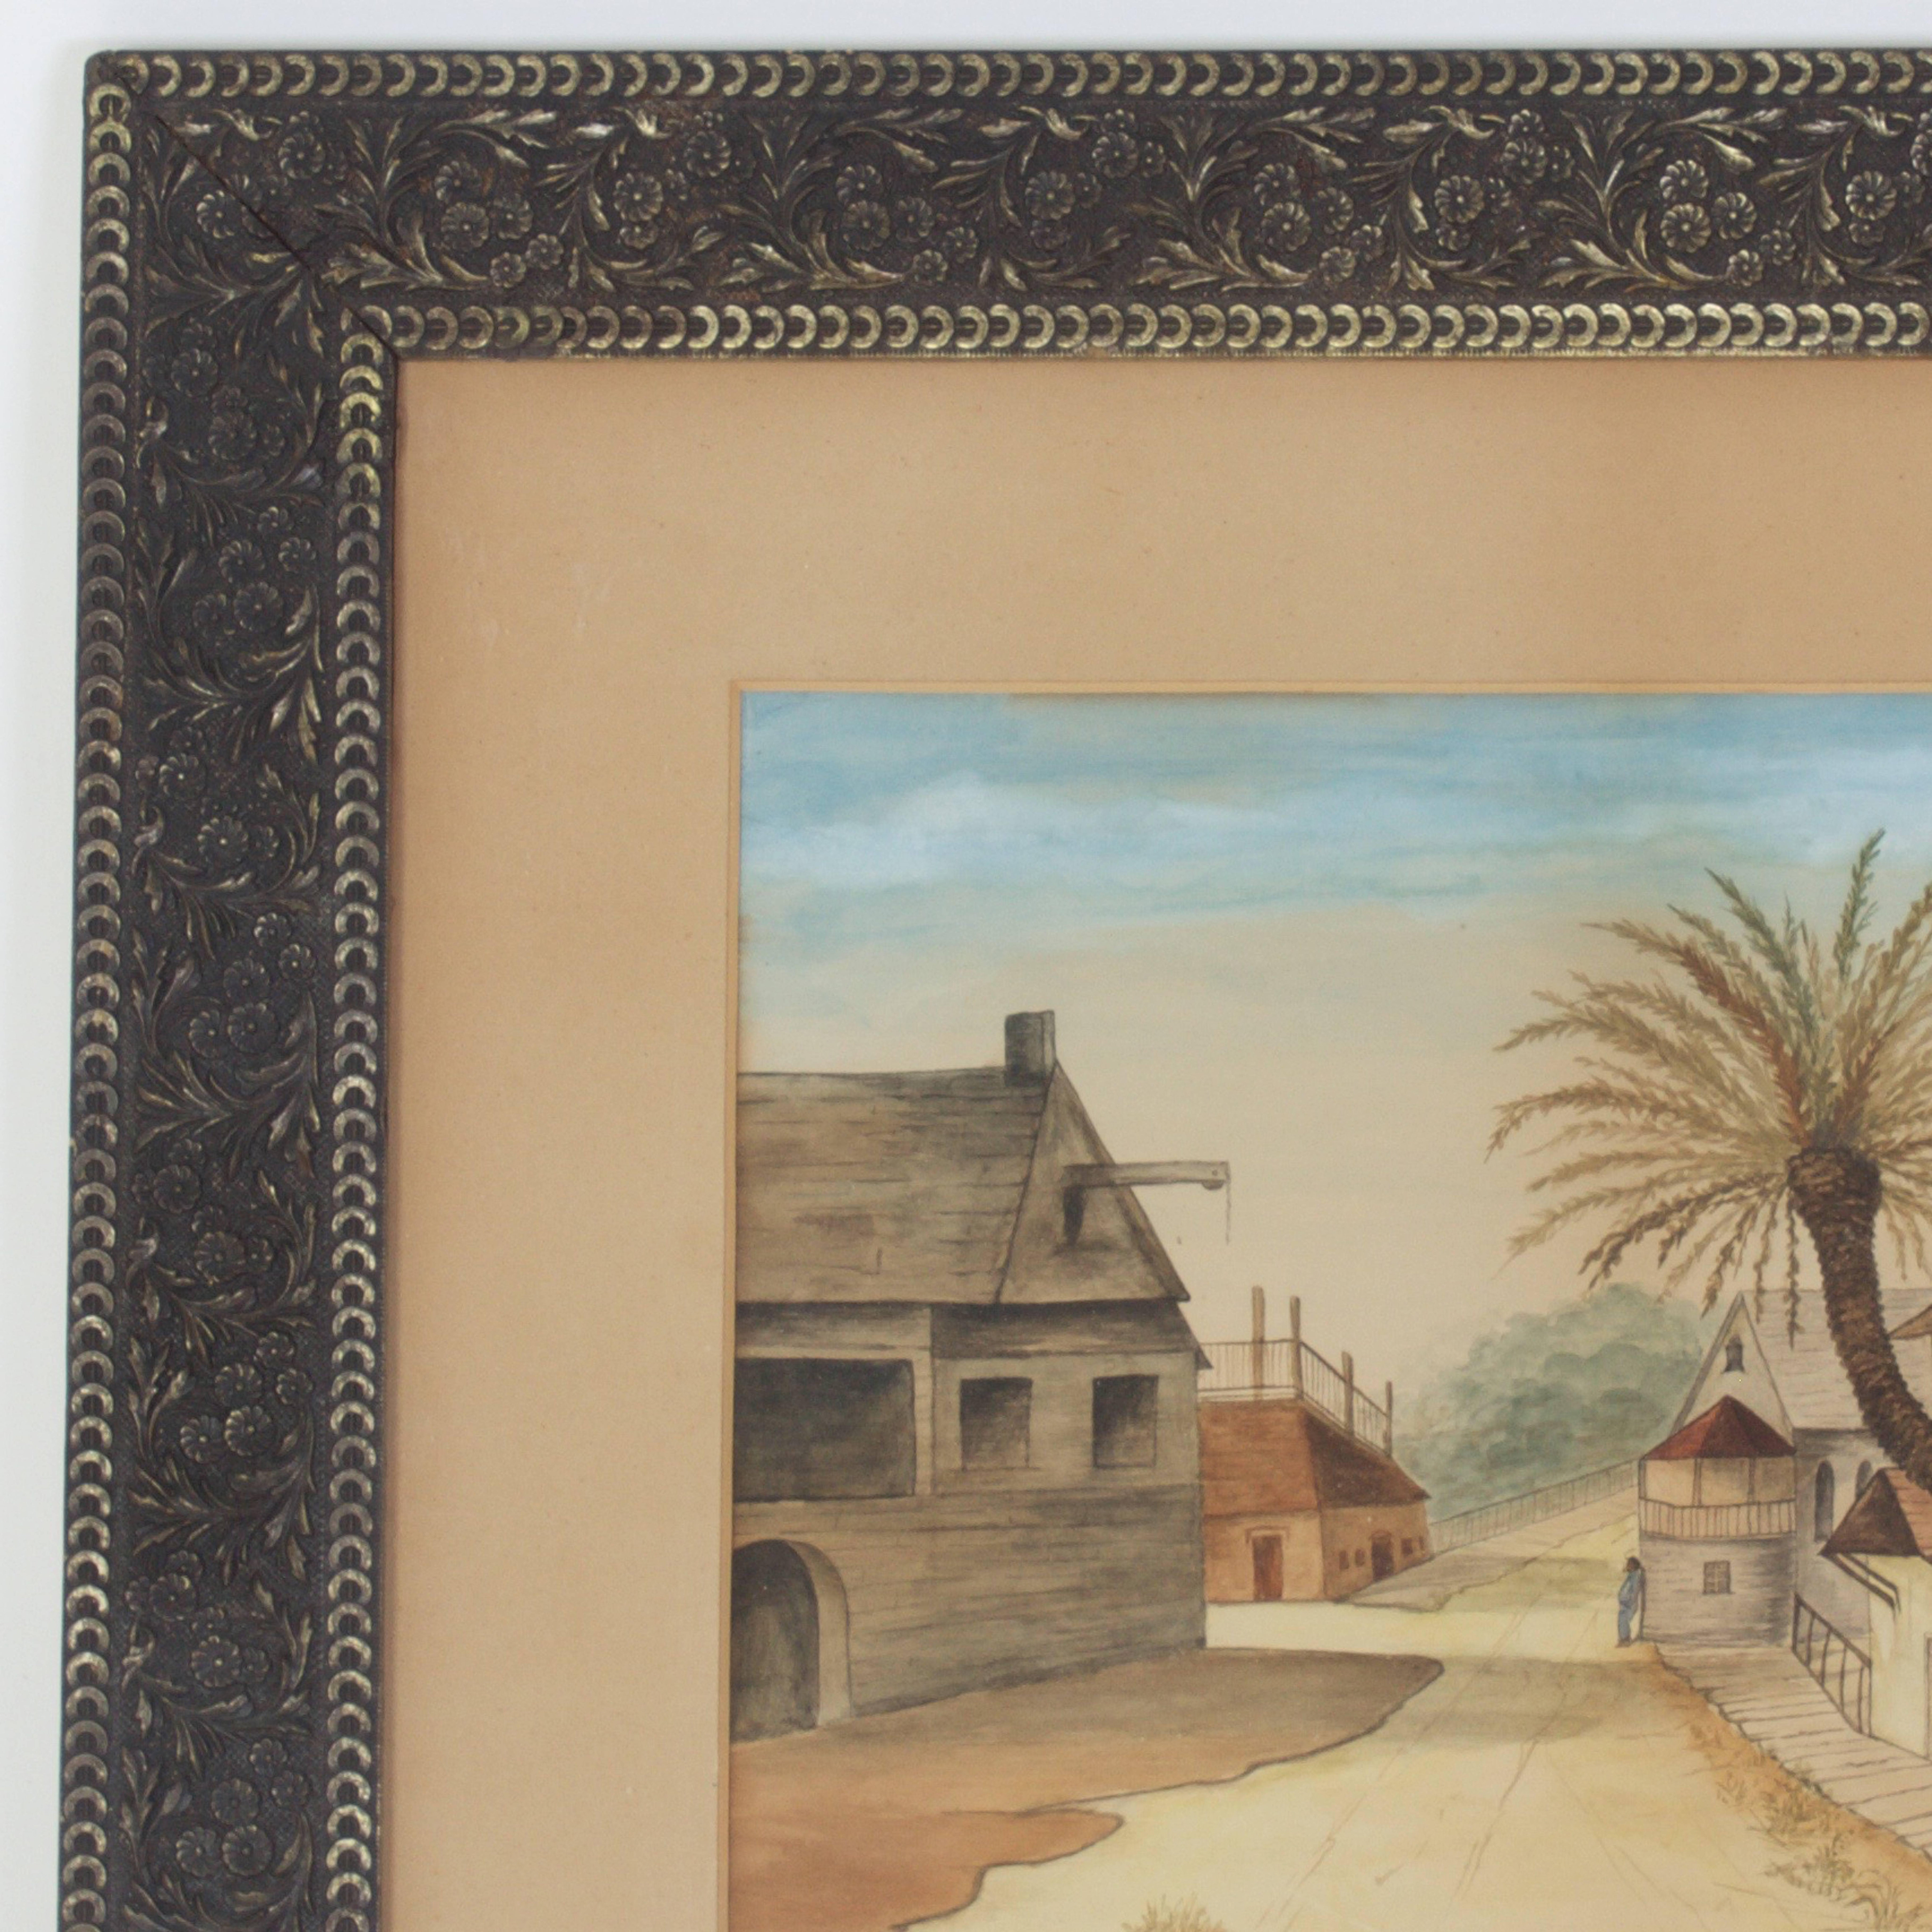 Folky tropical watercolor depicting a rural street scene with a date palm tree in the center surrounded by assorted clapboard structures, including a birdhouse on stilts. A lone figure of a man punctuates the quiet mood. Initialed and dated in the